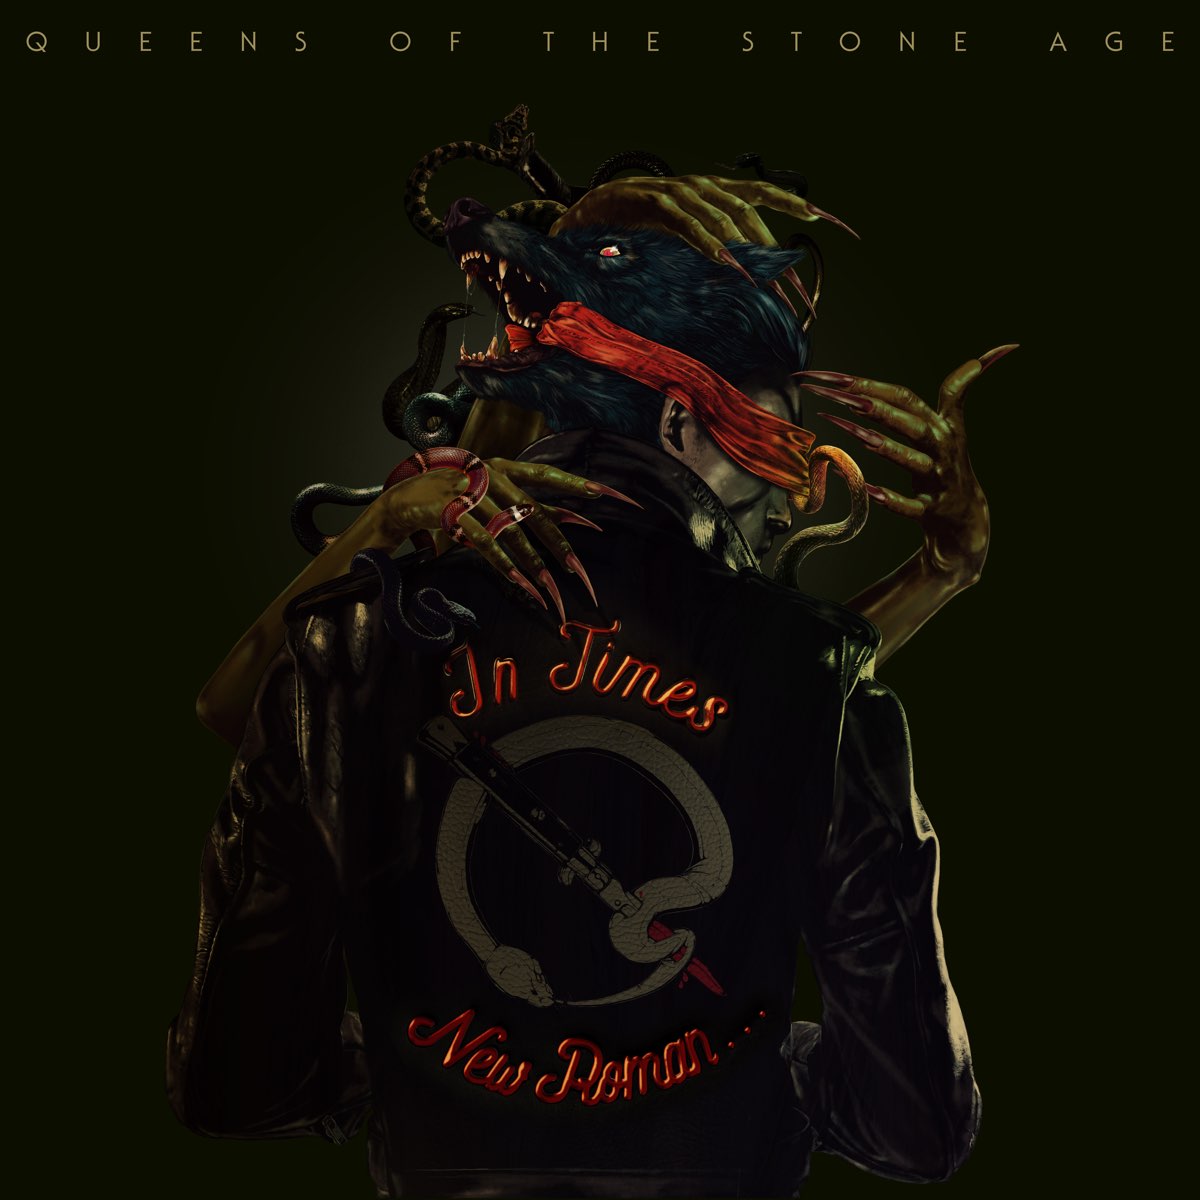 Queens of the Stone Age In Times New Roman... cover artwork